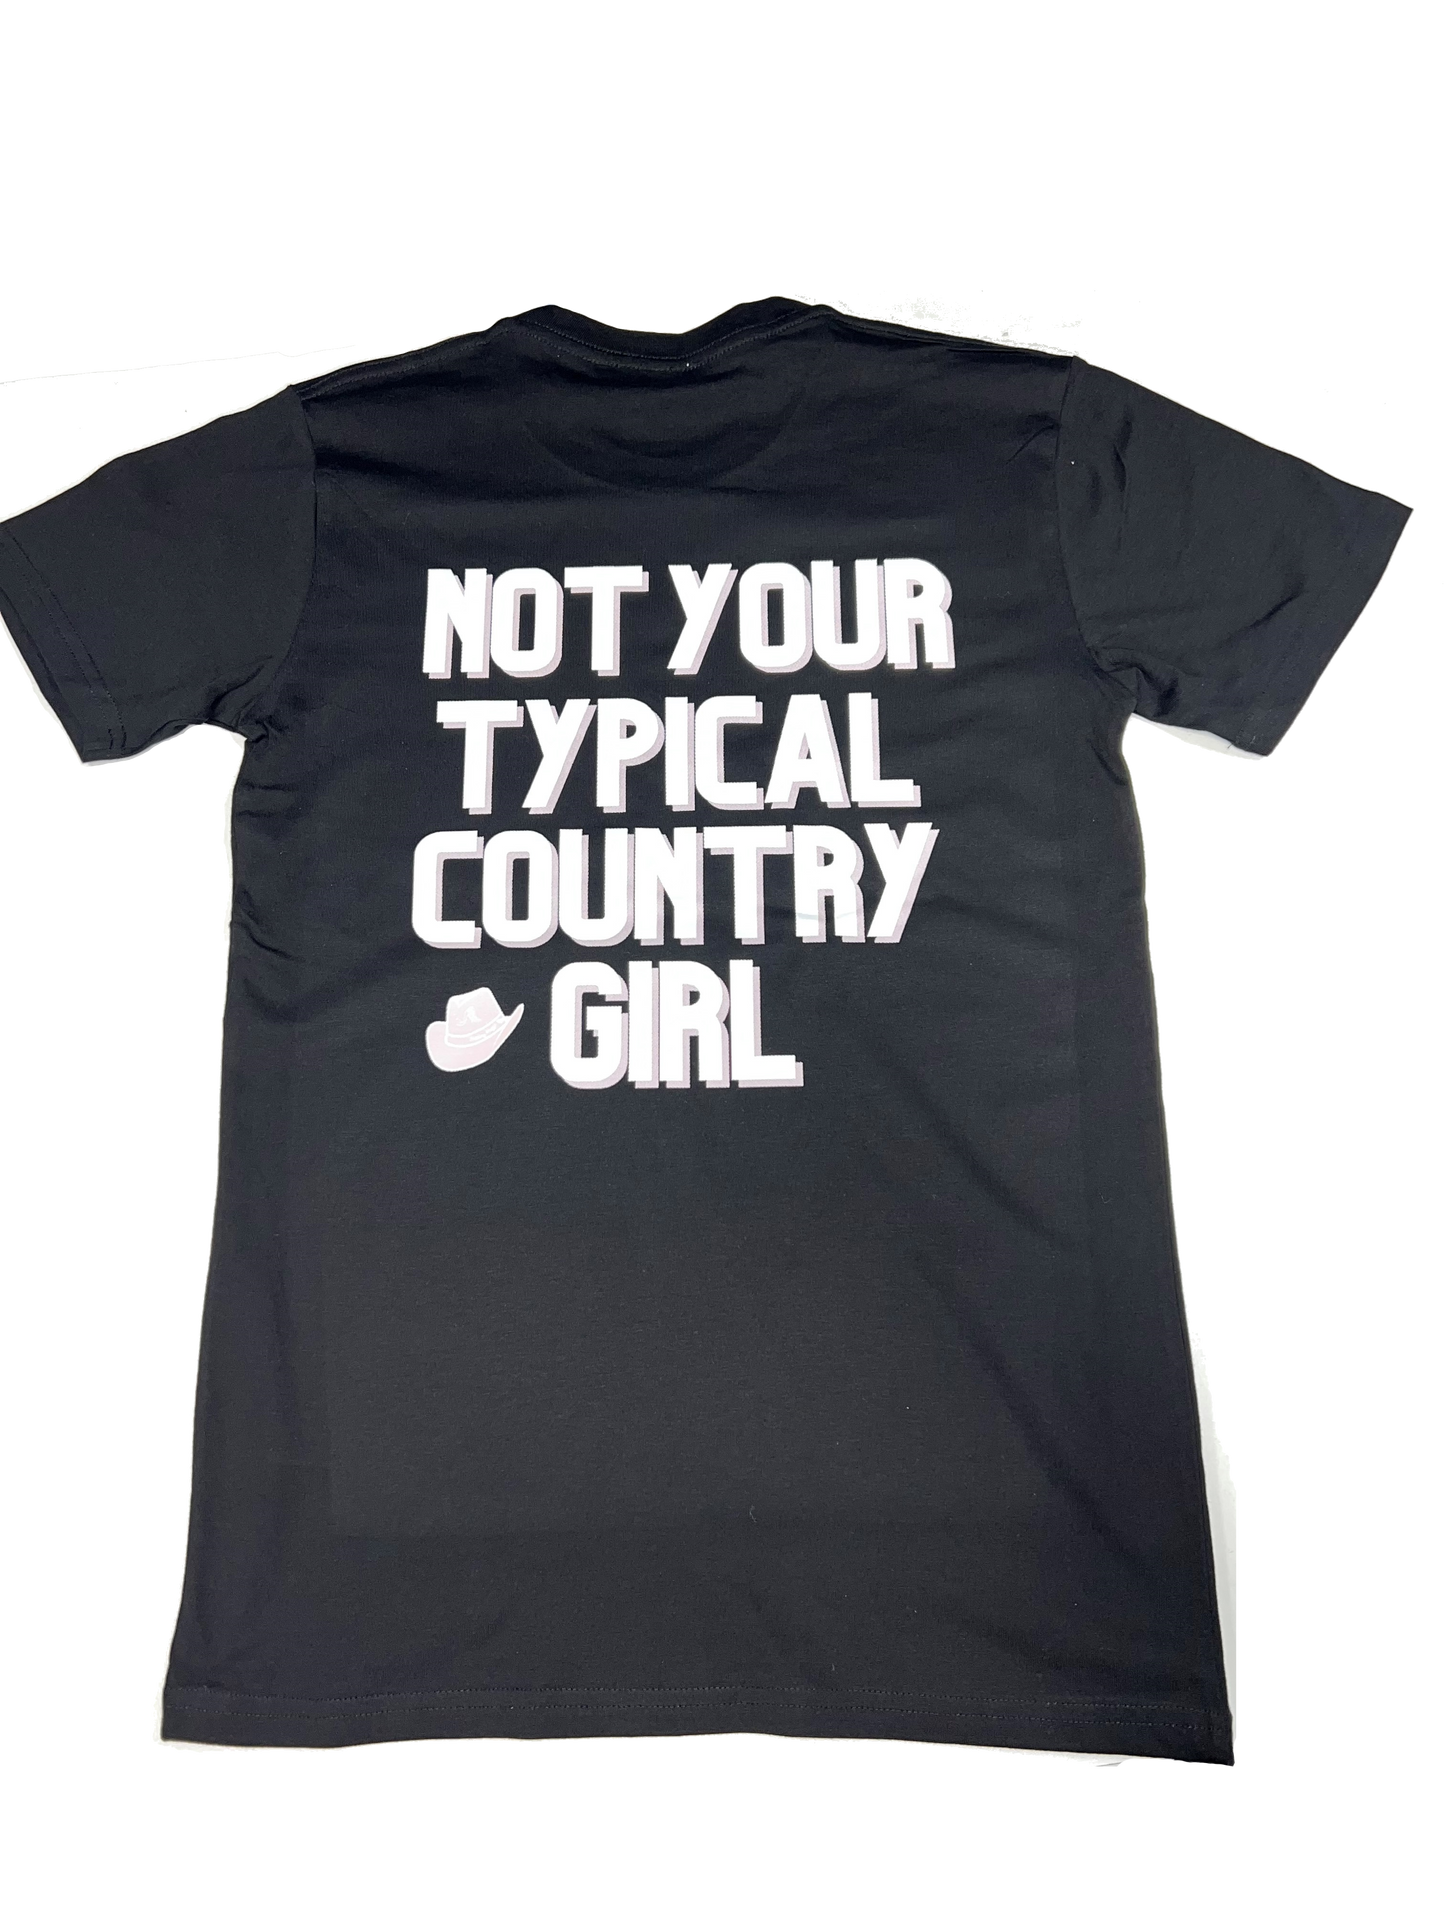 Not your typical country girl - T-Shirt